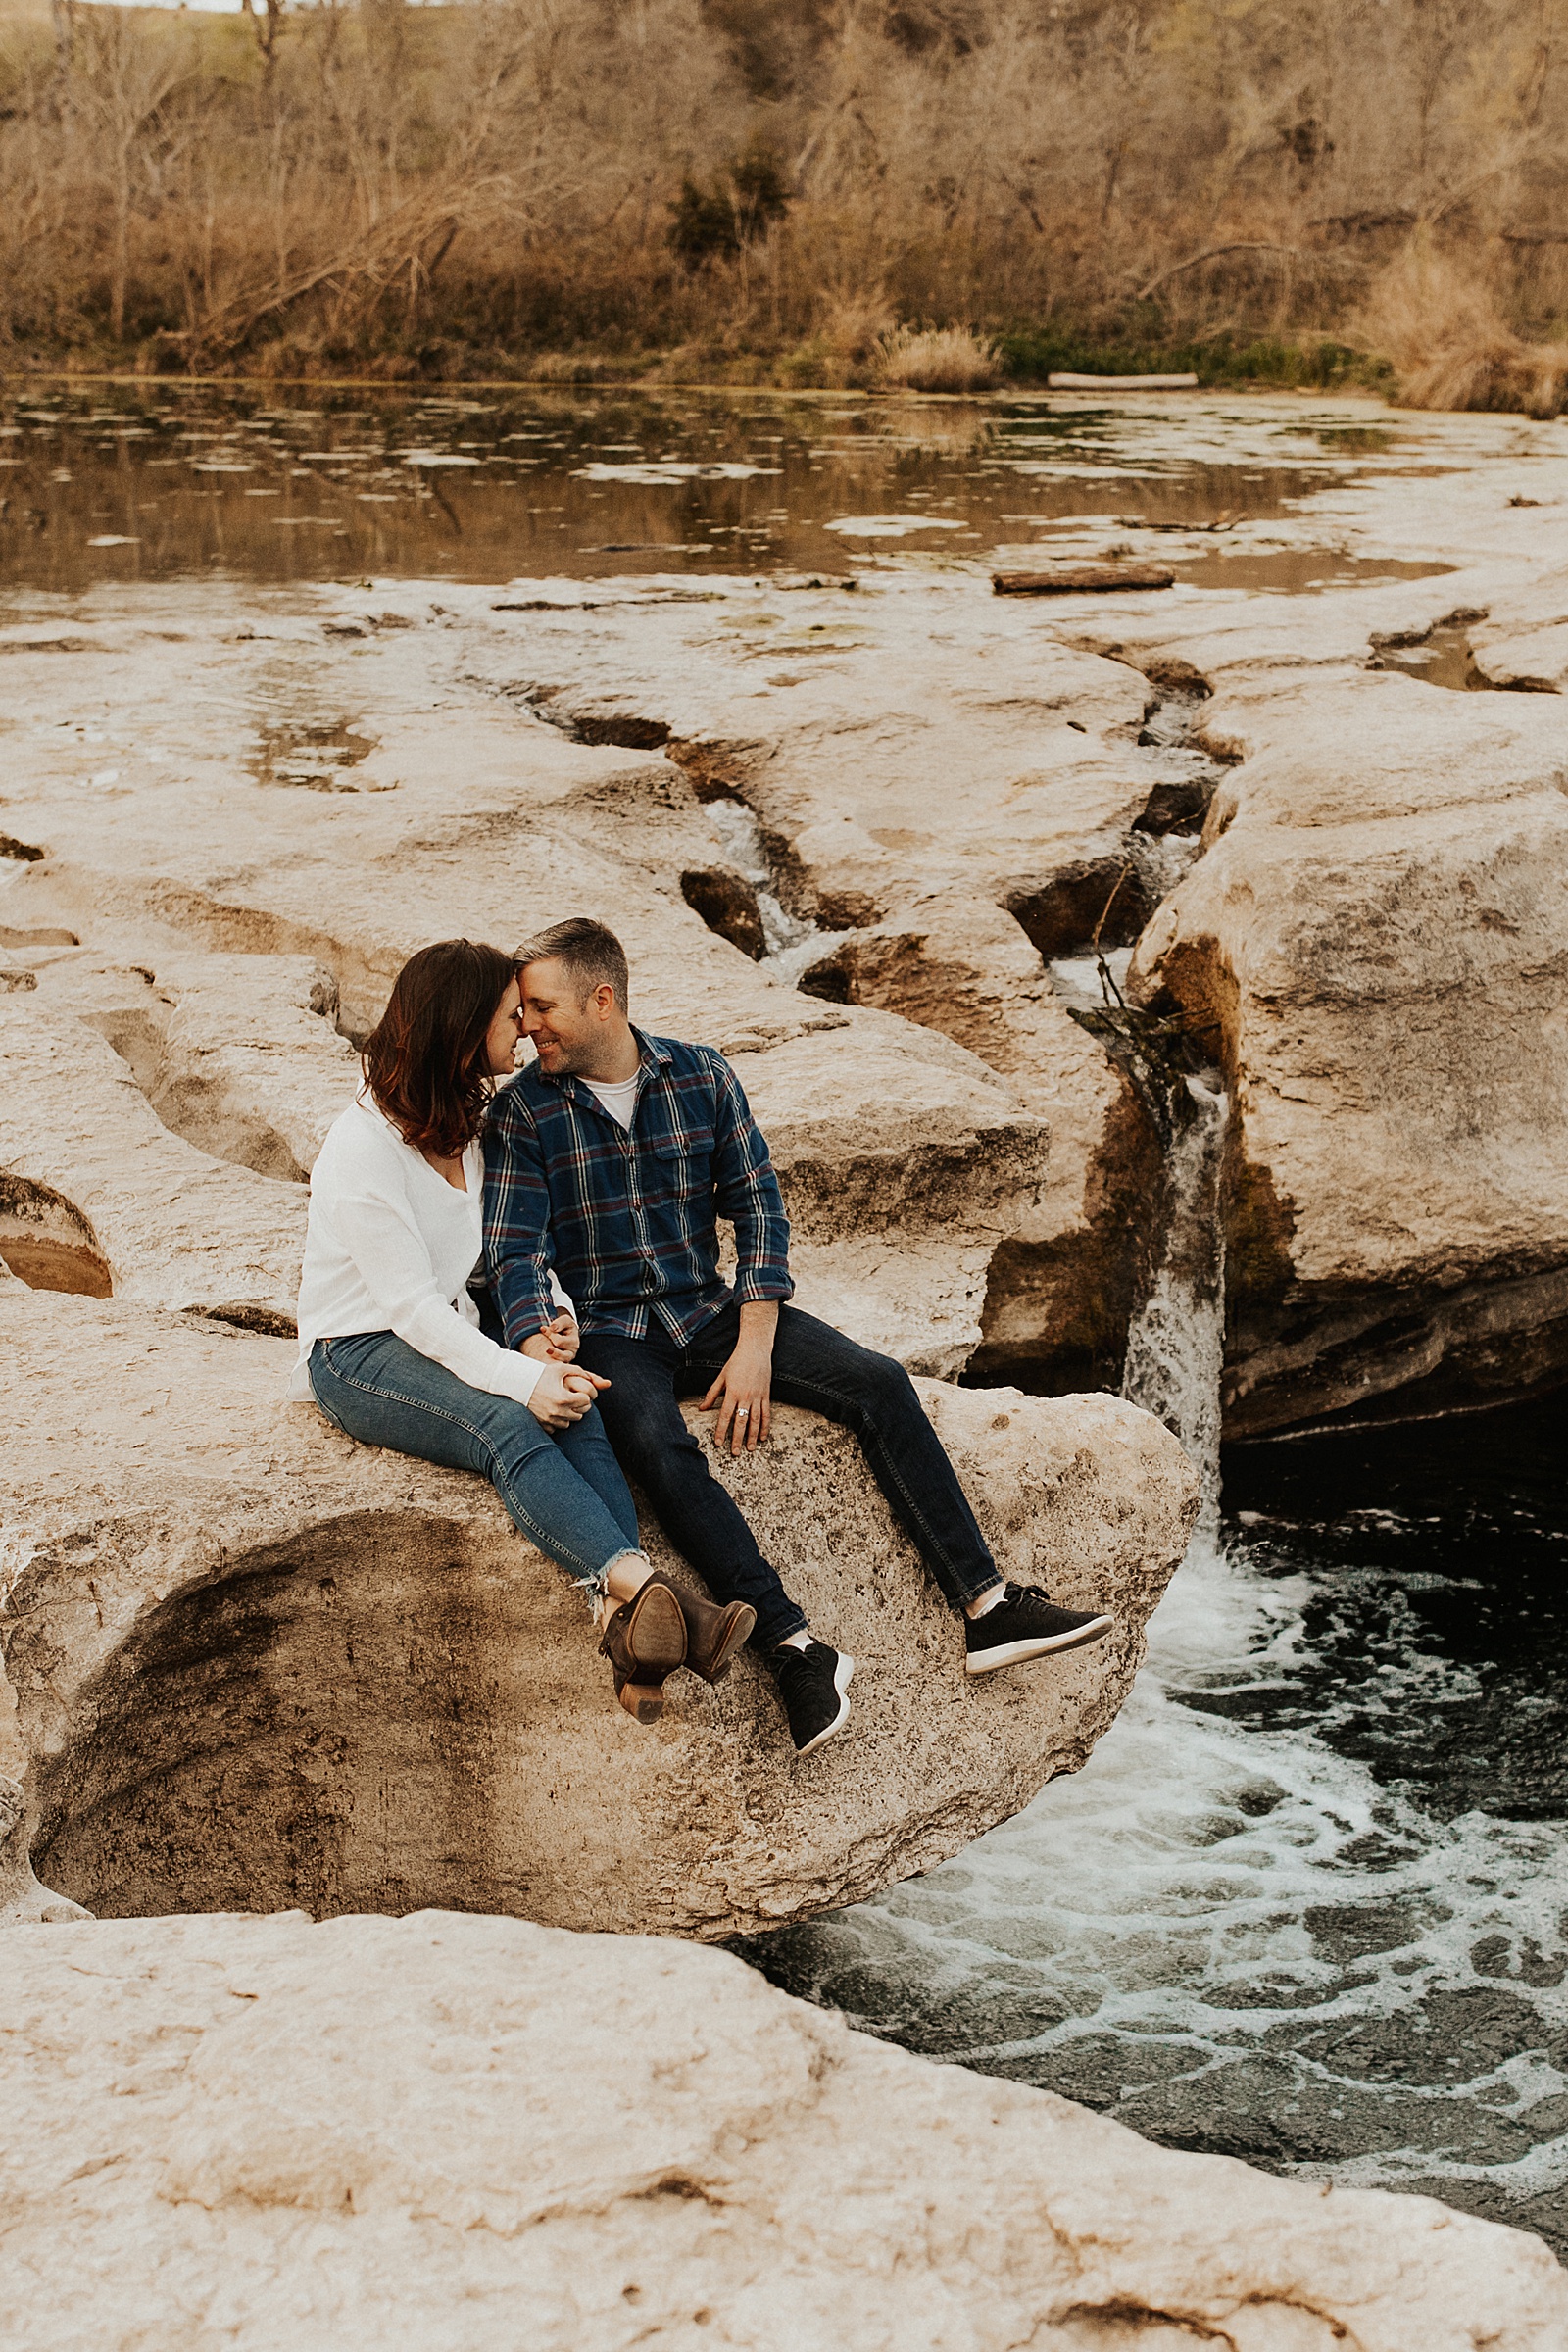 We ended their engagement session with some fun at McKinney Falls State Park in Austin, TX.